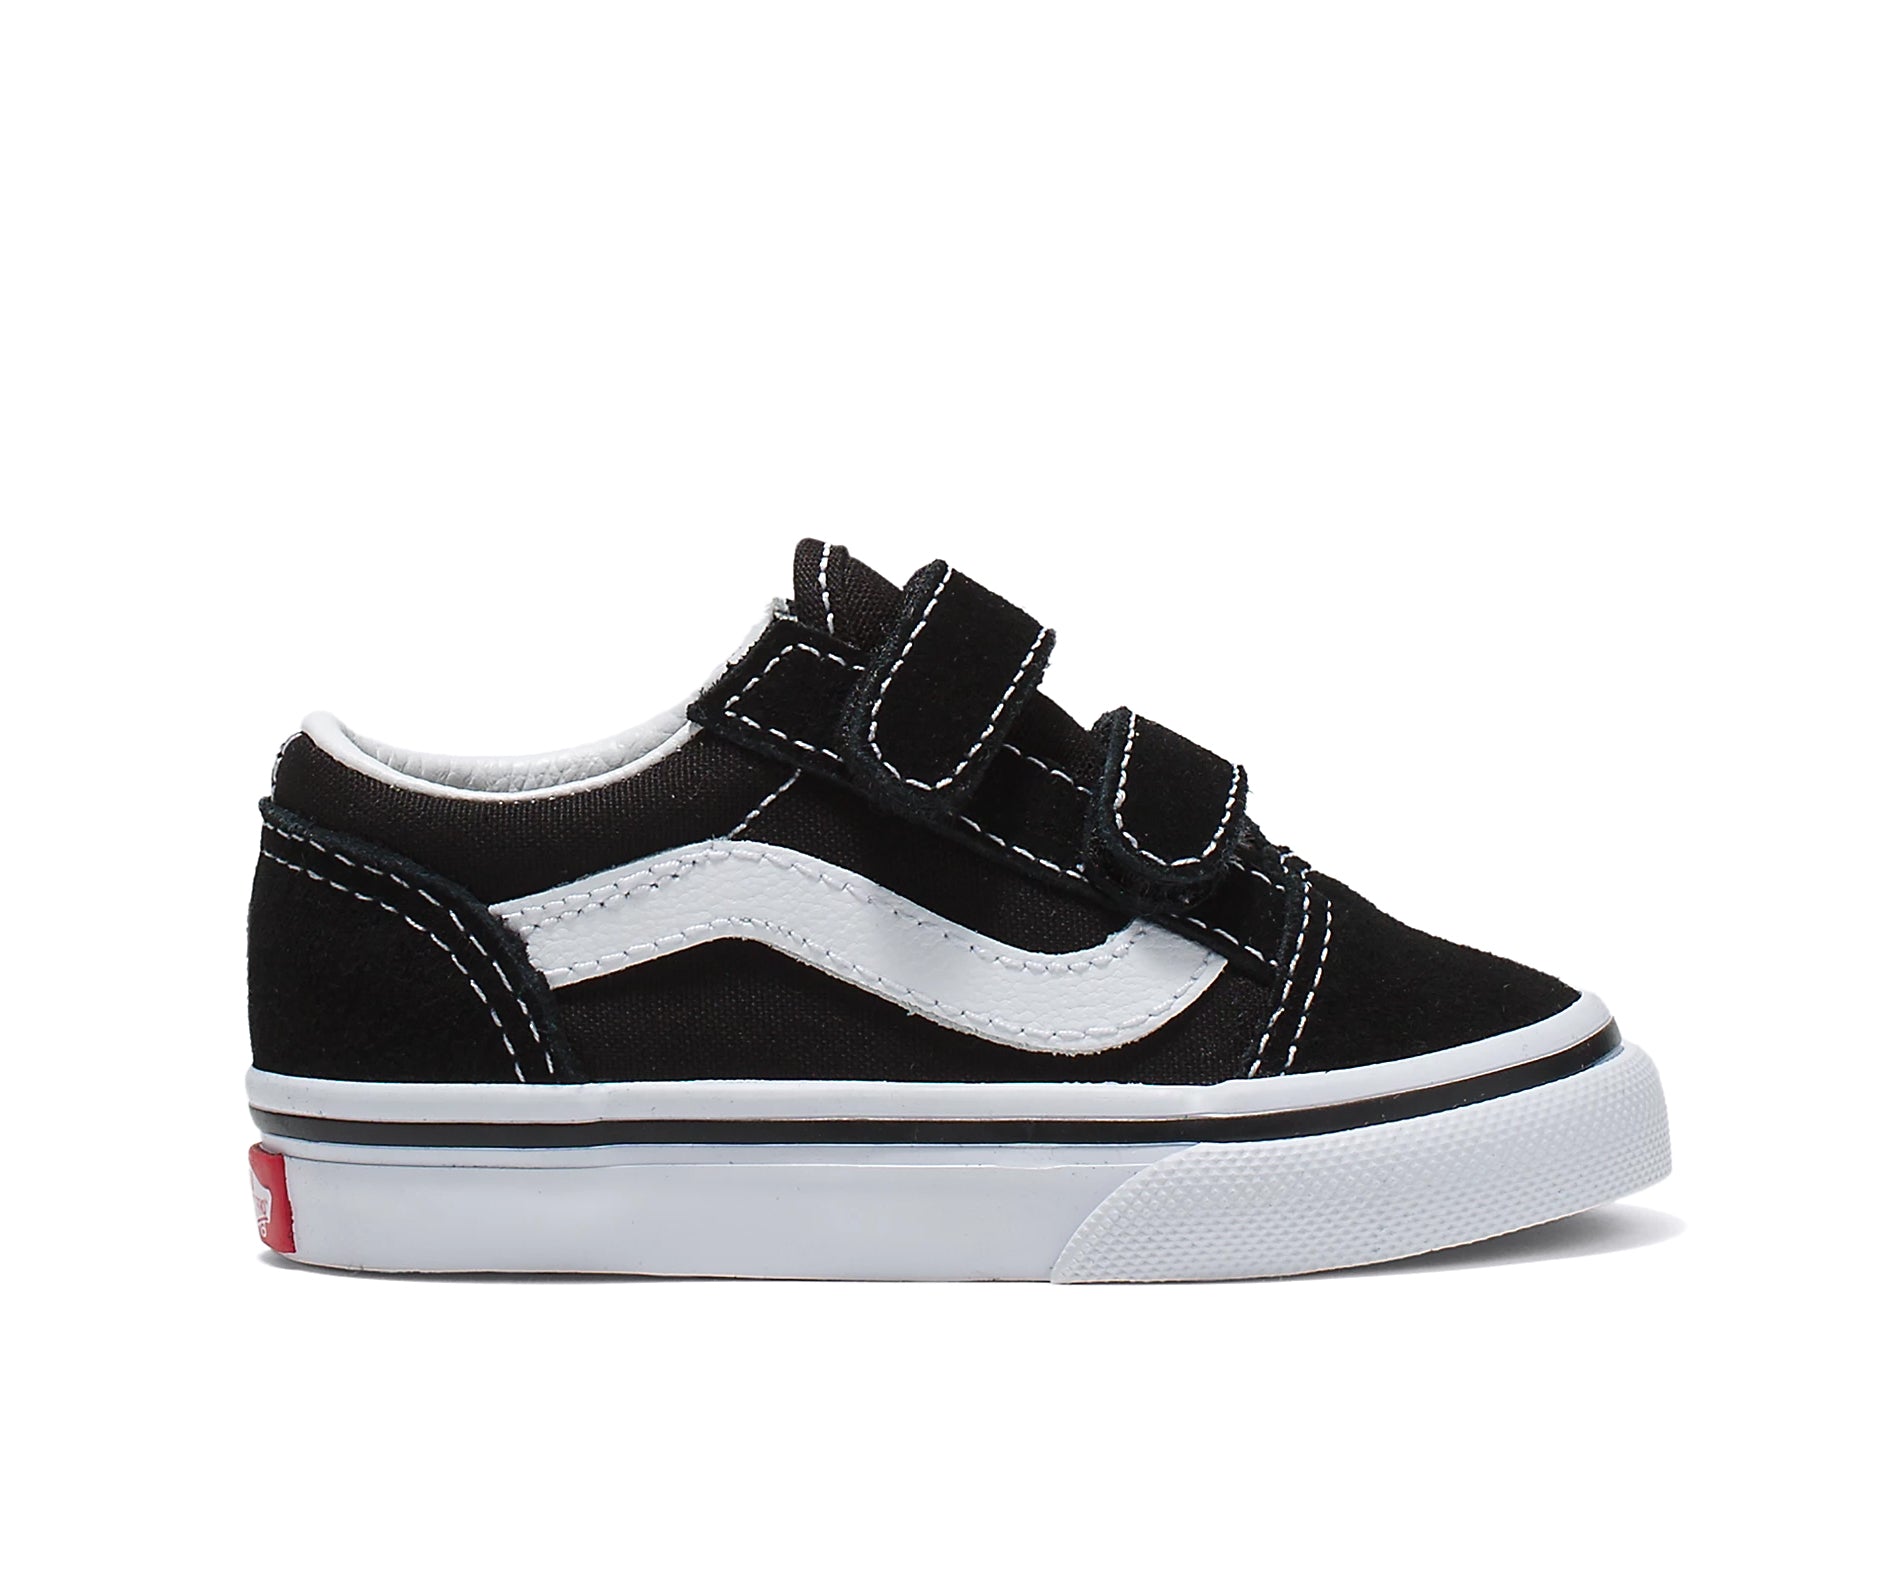 A black canvas and suede kids' sneaker with velcro straps.